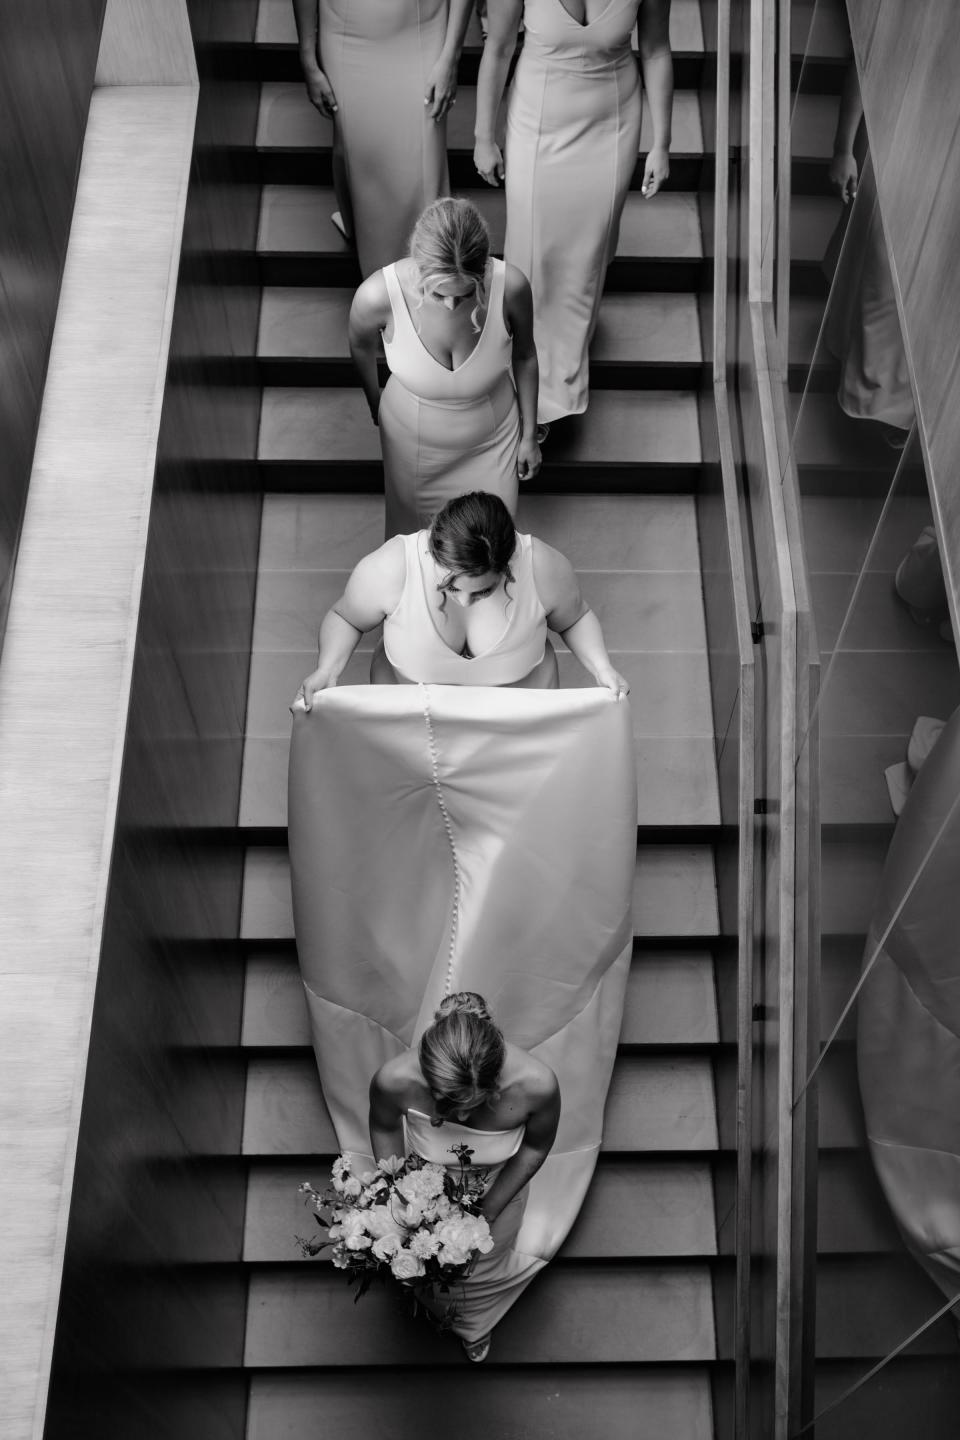 A bride walks down a staircase as her bridesmaids carry her dress and follow her.